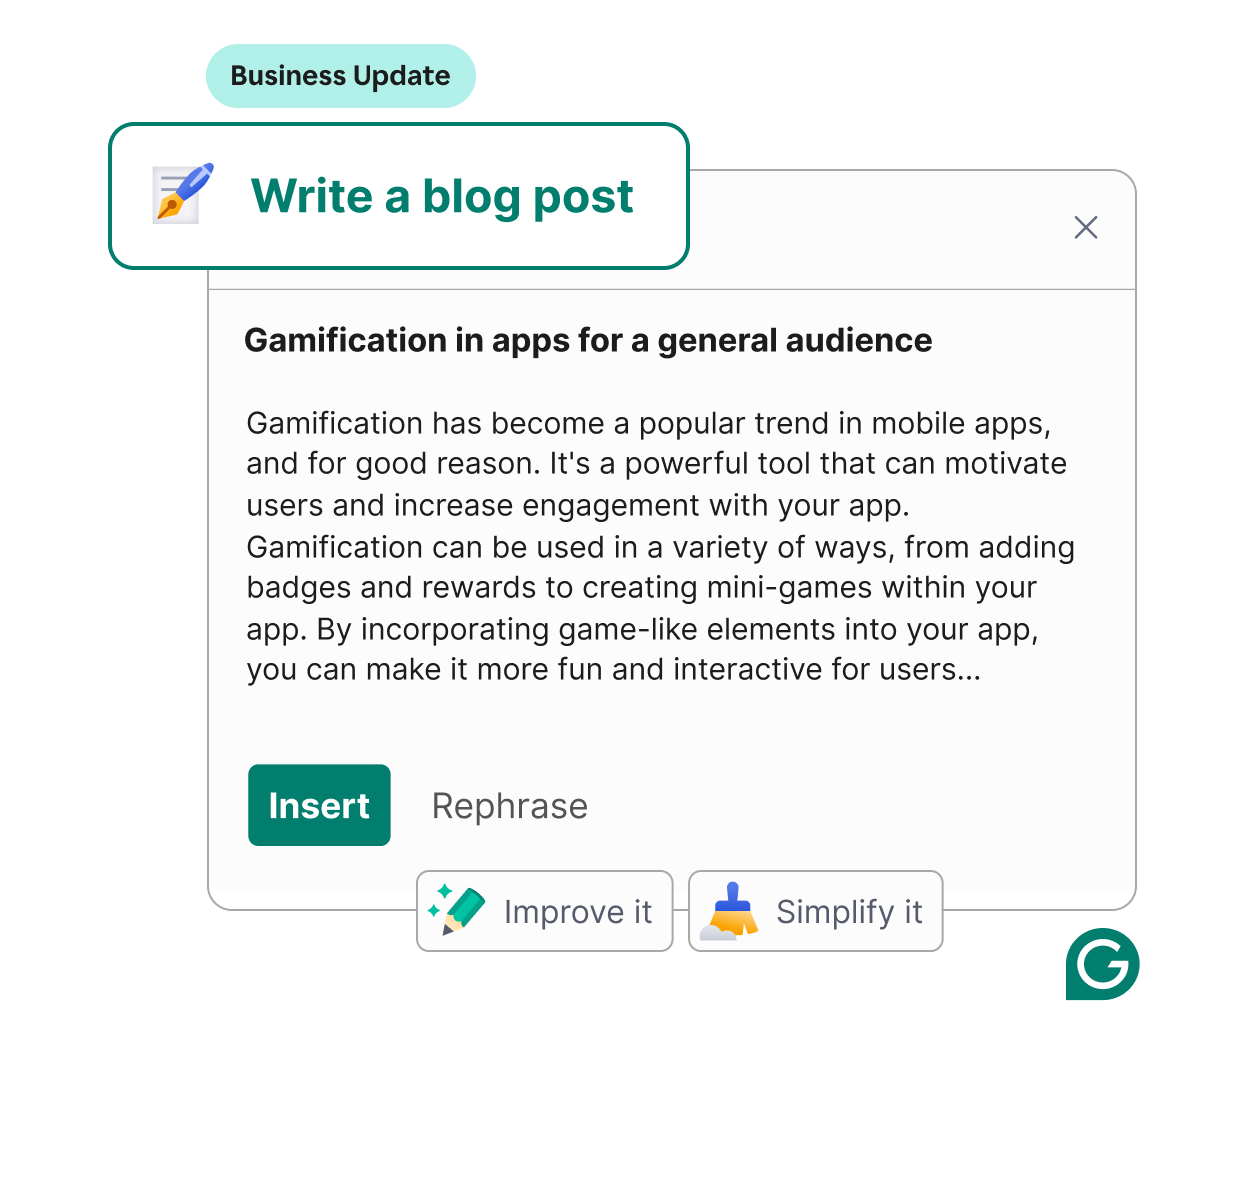 Grammarly assists with writing a blog post.